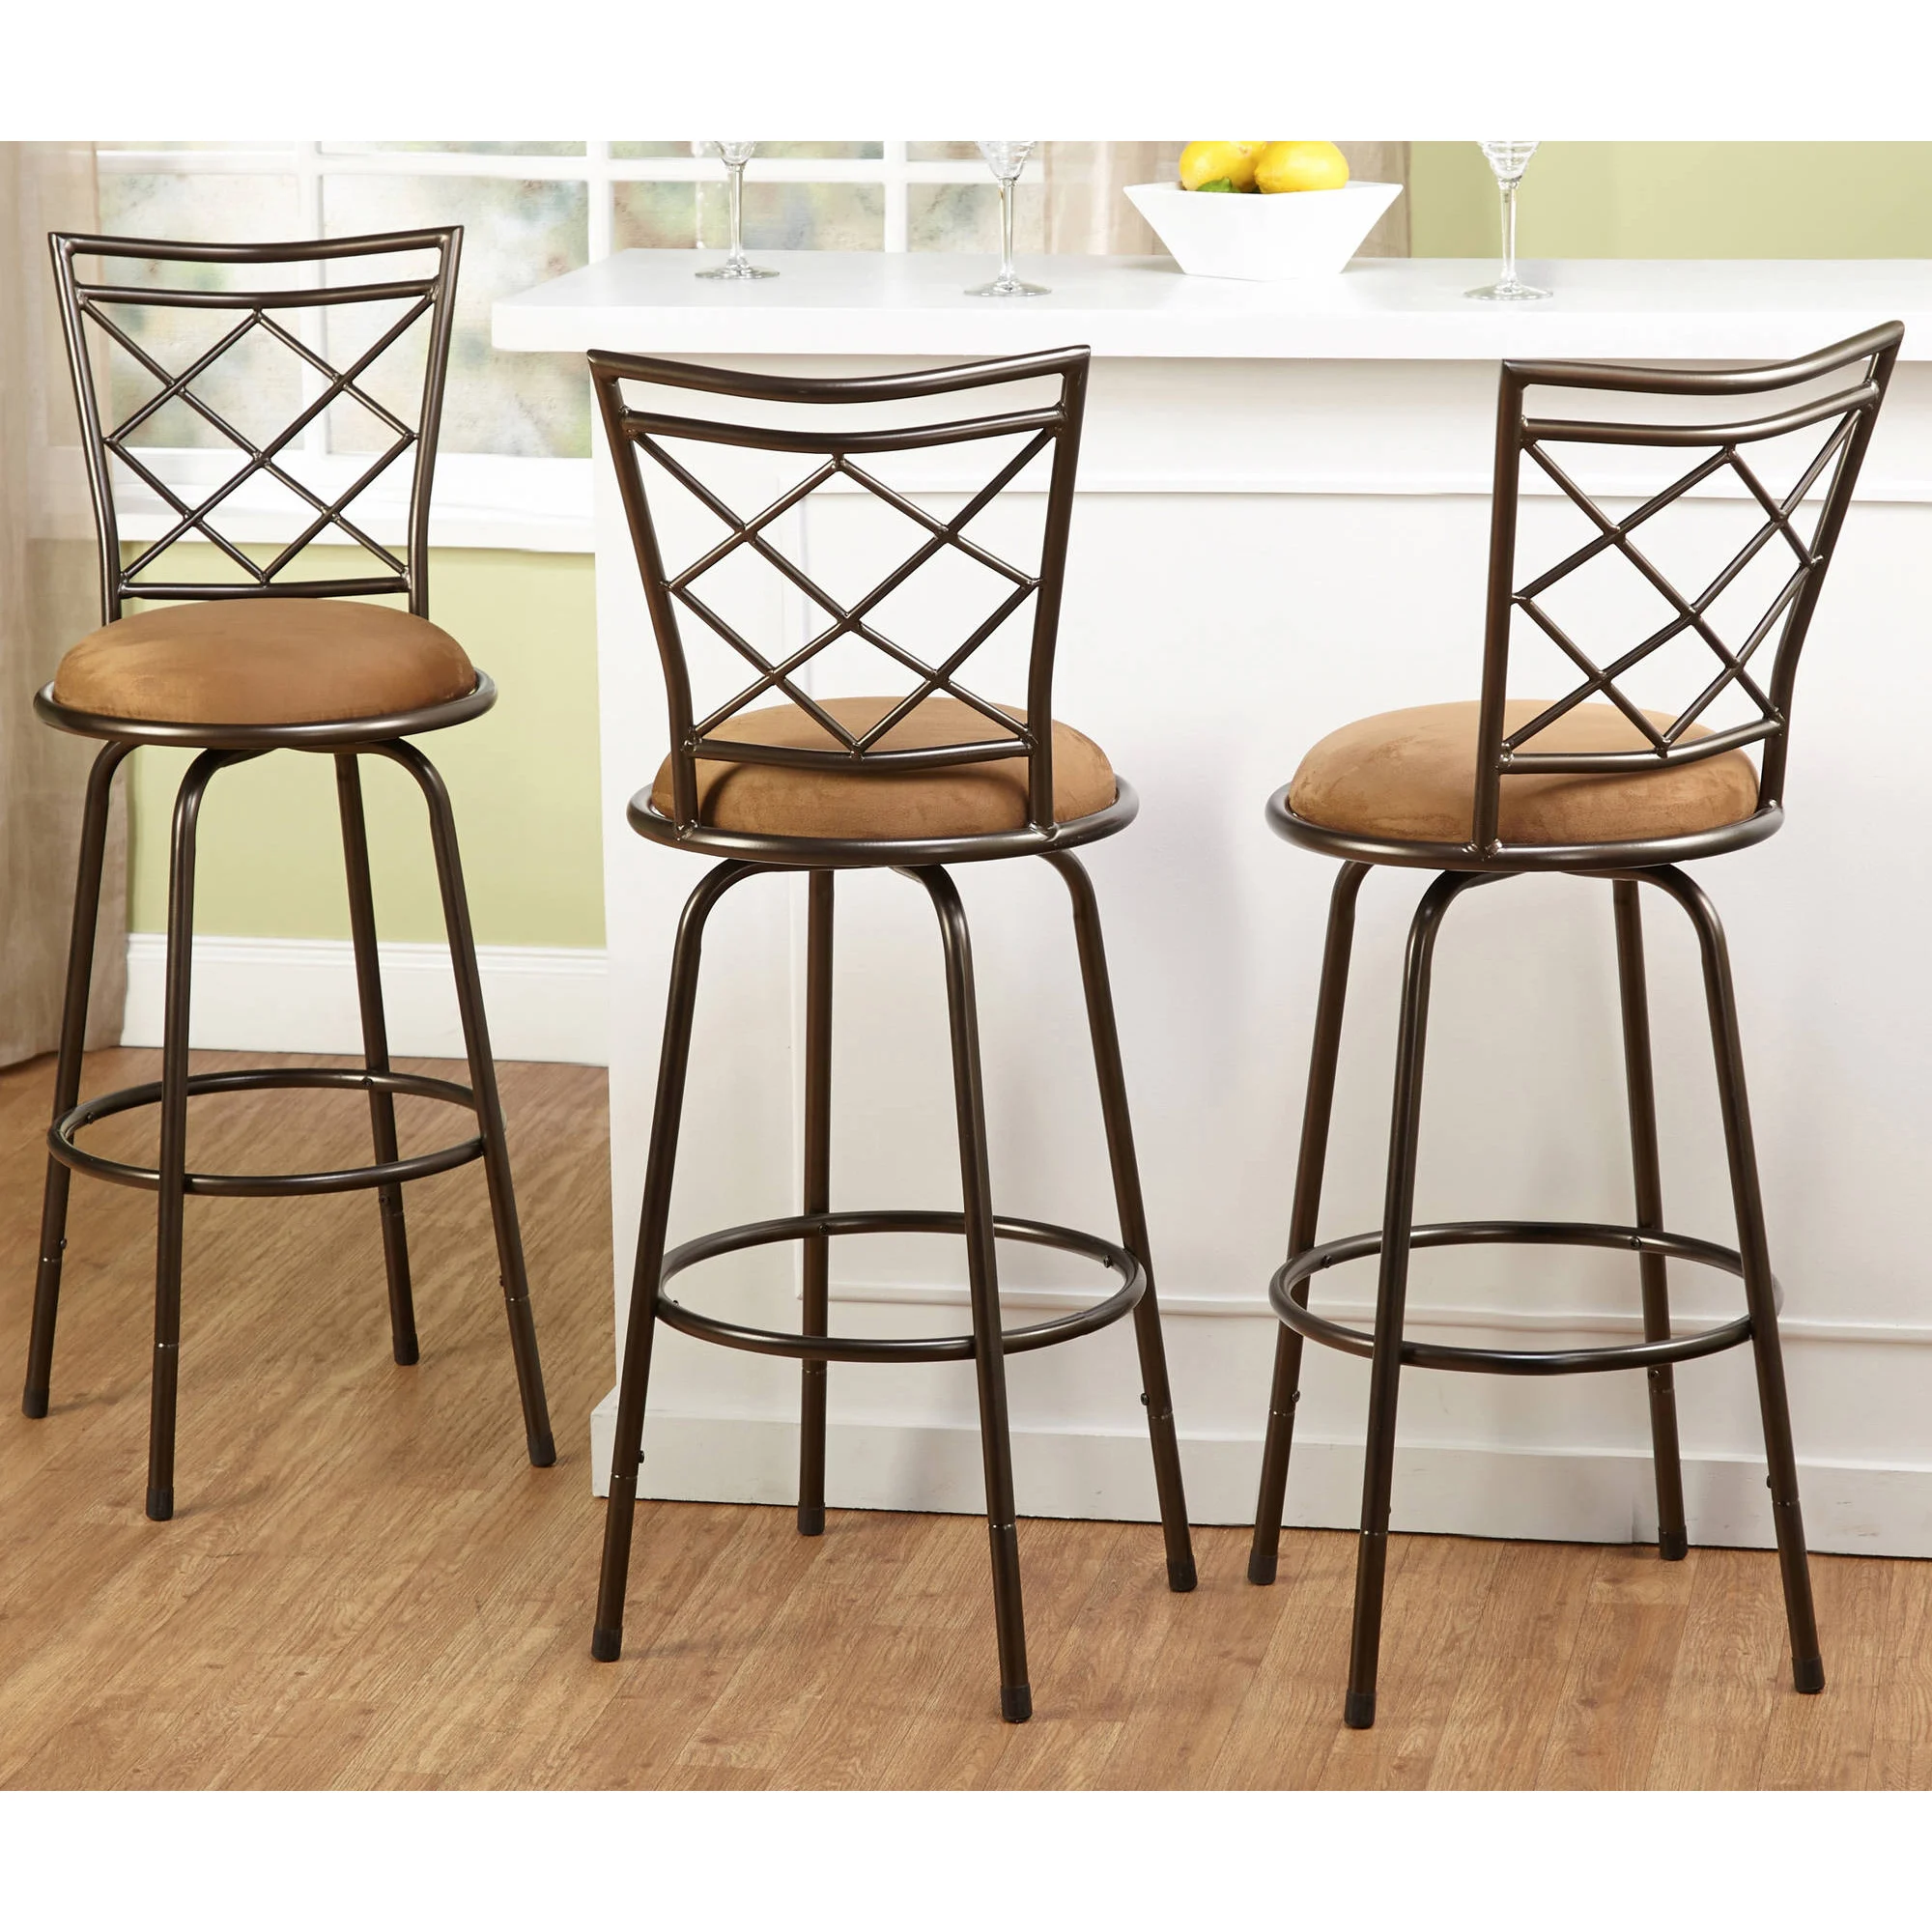 
Swivel round seat bar counter height adjustable metal bar stools supplier  (60762500633)